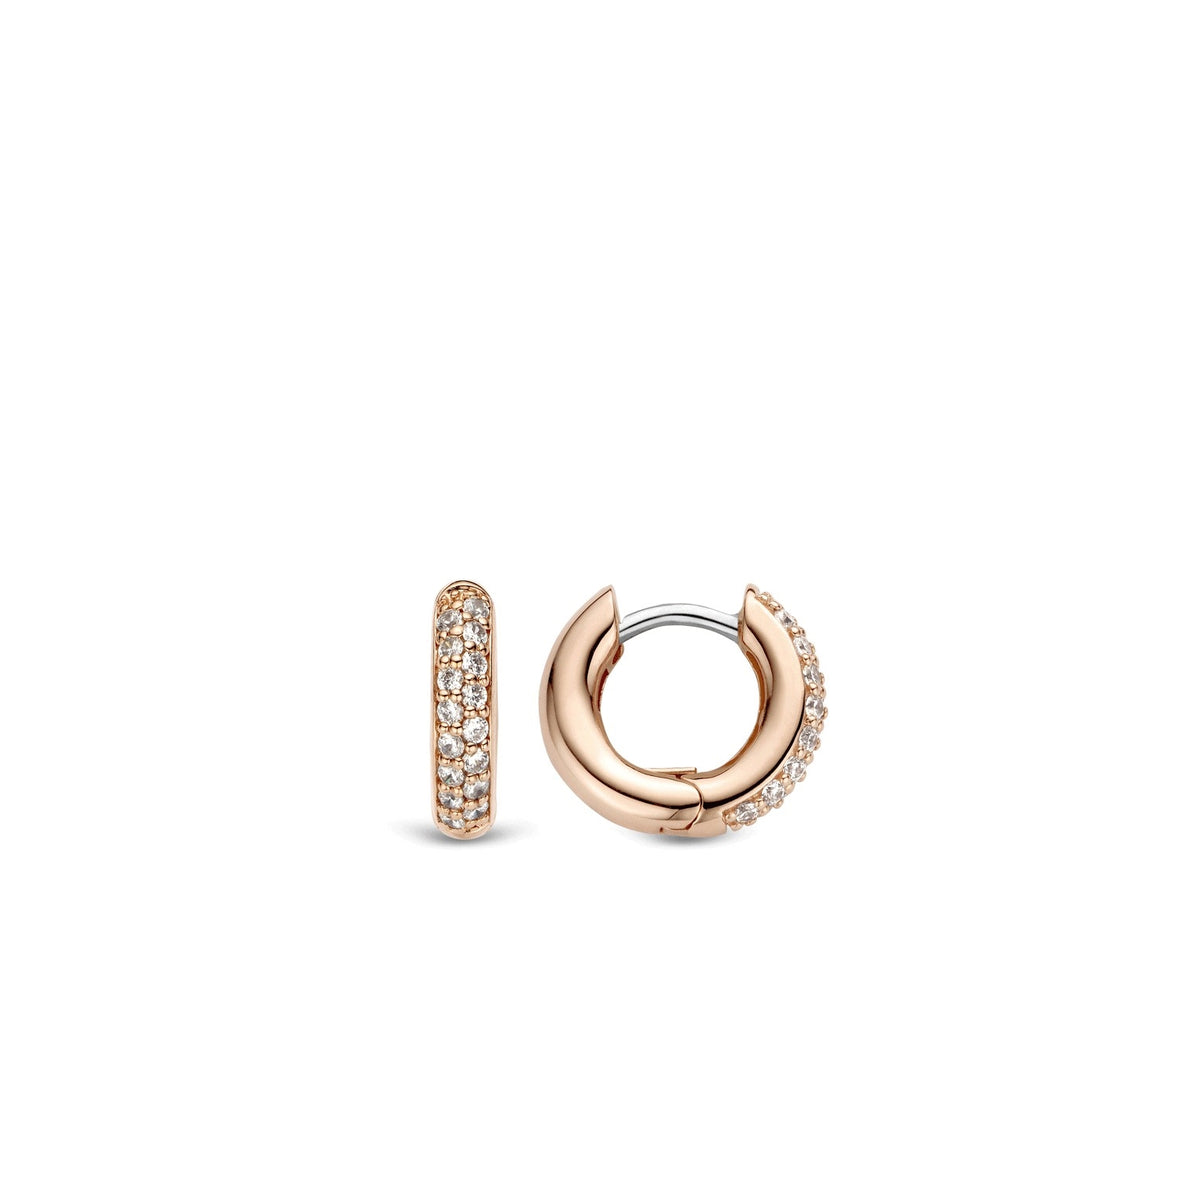 TI SENTO Sterling Silver Rose Tone Huggie Earrings with Pave Cubic Zirconia